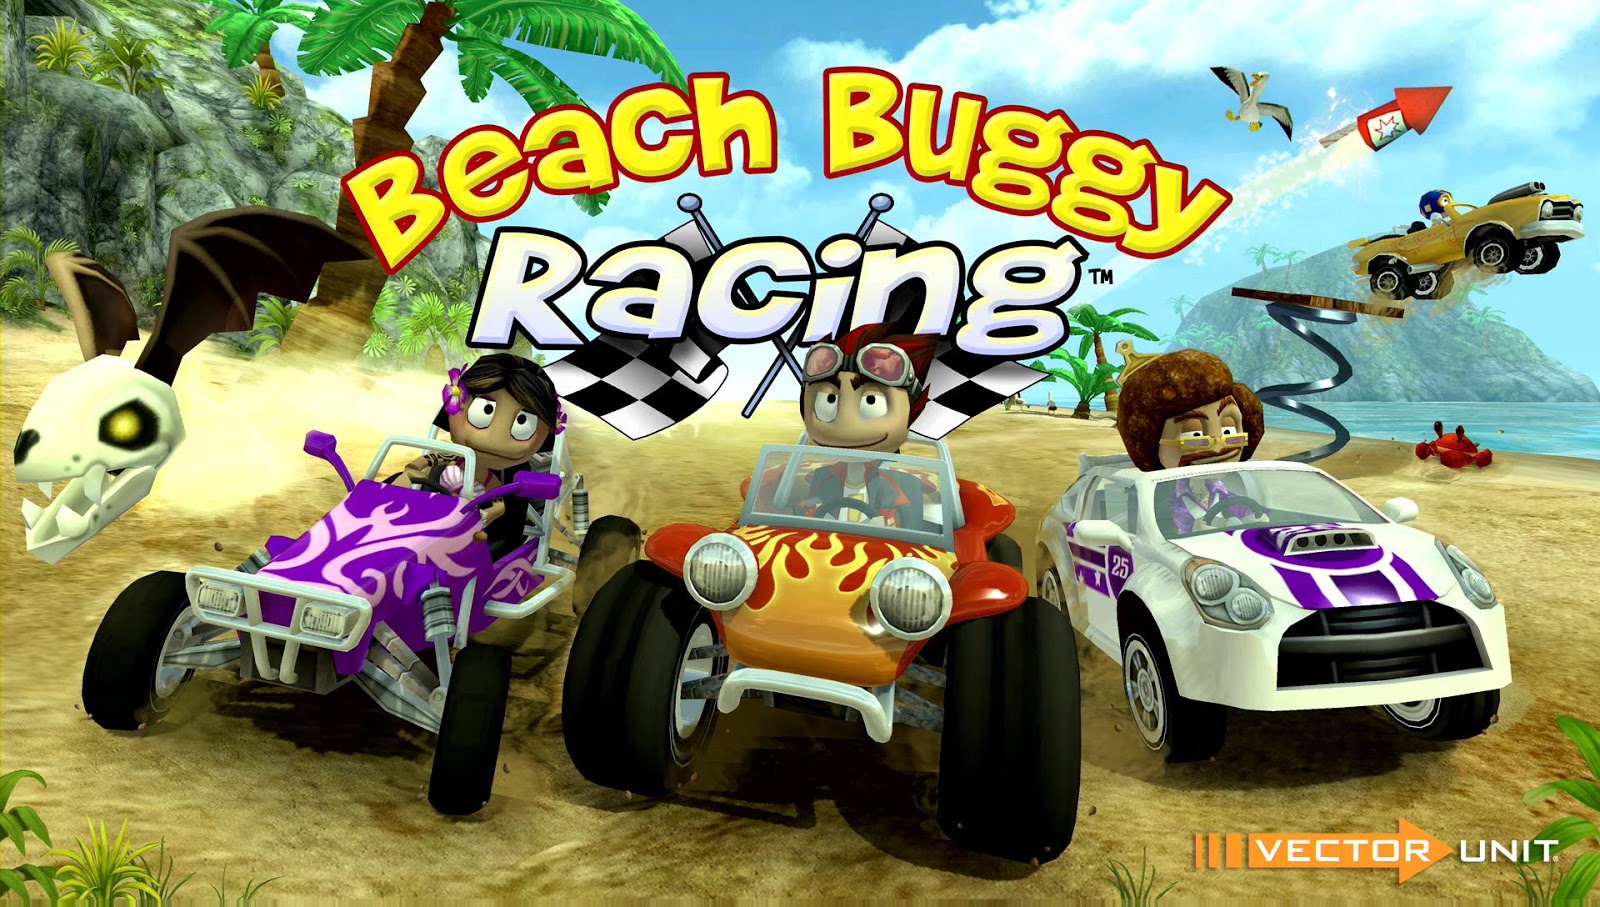 Download Beach Buggy Racing v1.2.12 MOD APK (Unlimited Coins, Diamonds